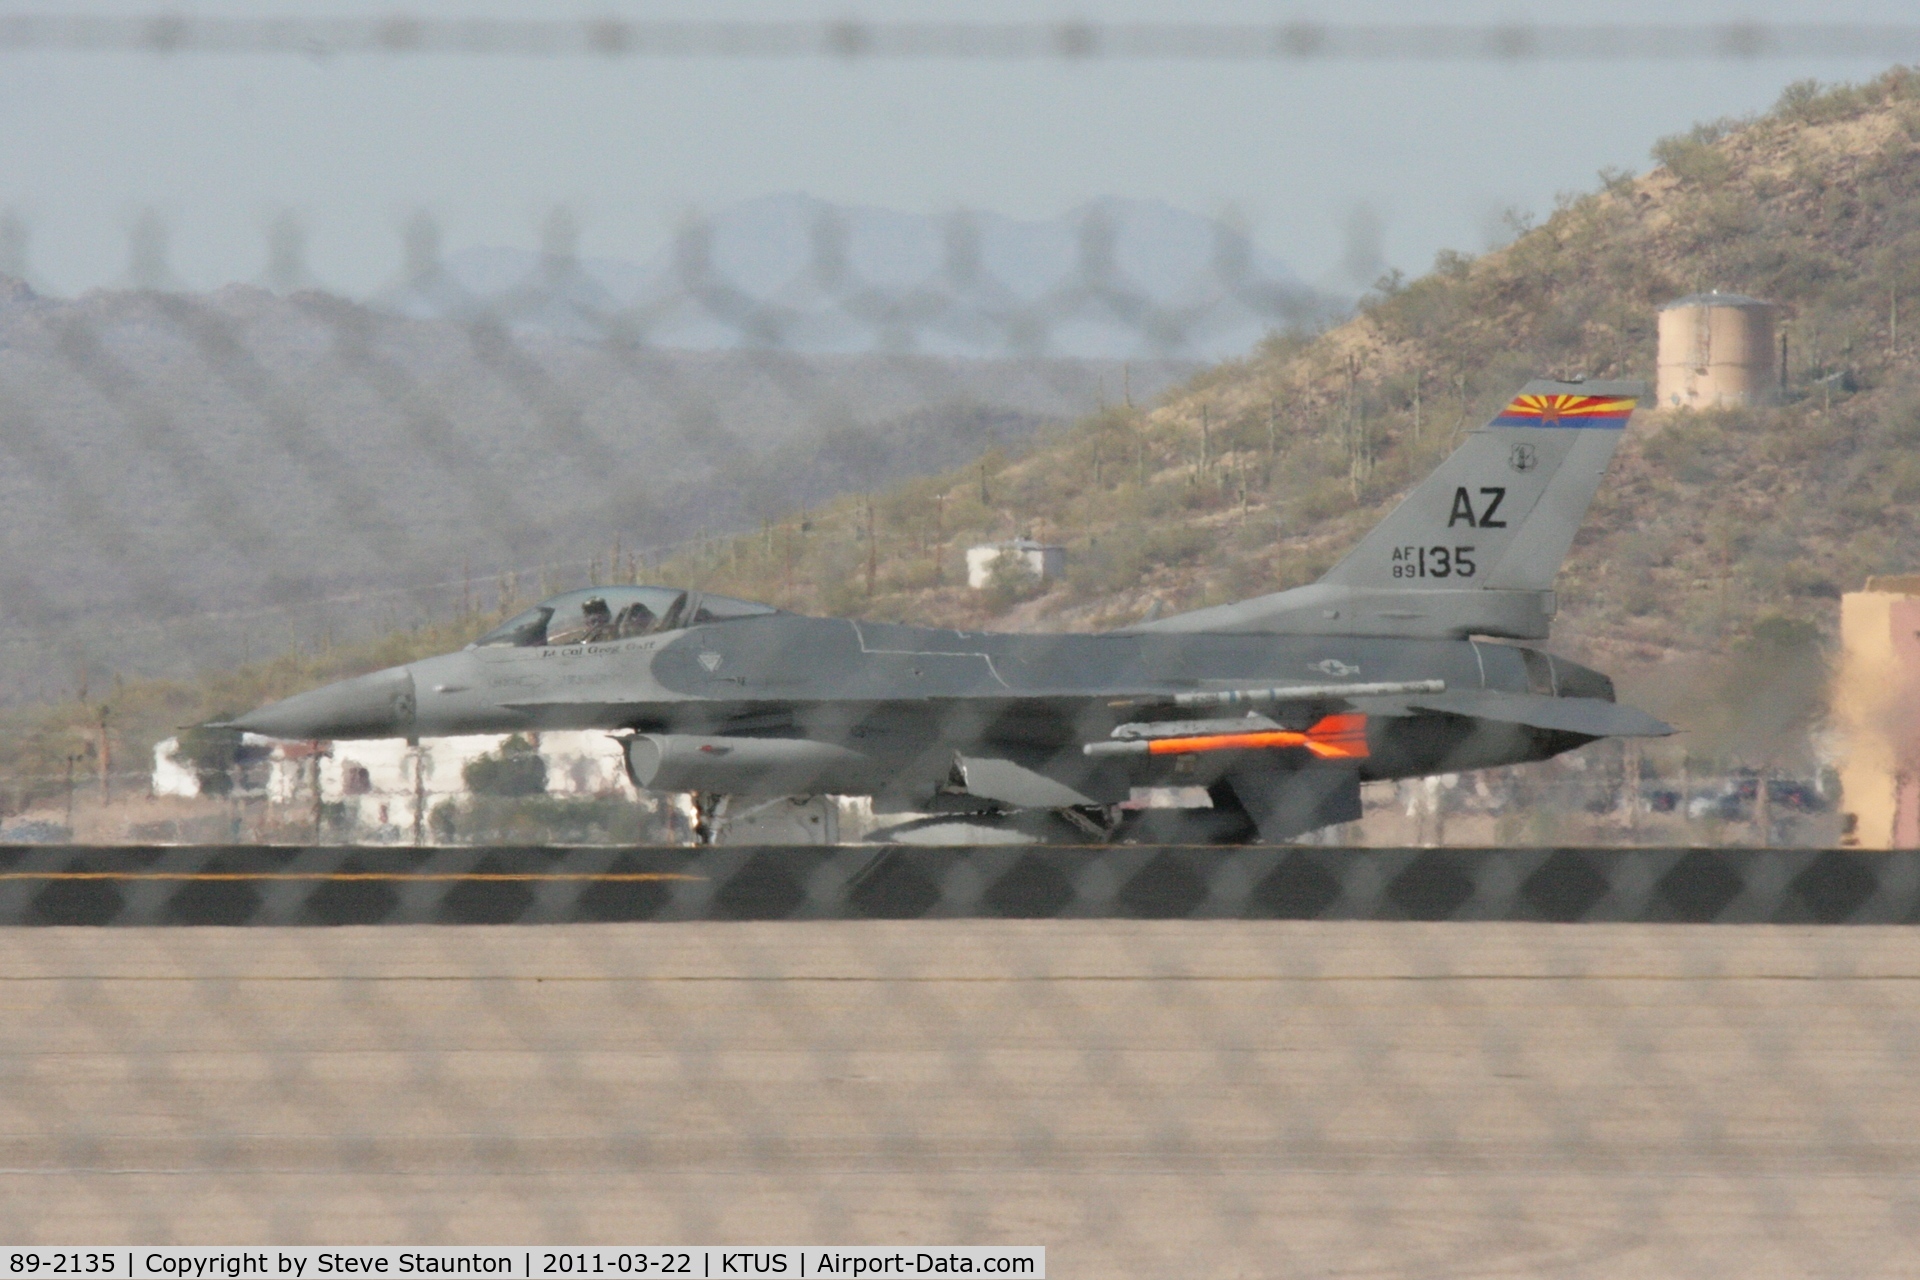 89-2135, General Dynamics F-16C C/N 1C-288, Taken at Tucson International Airport, in March 2011 whilst on an Aeroprint Aviation tour